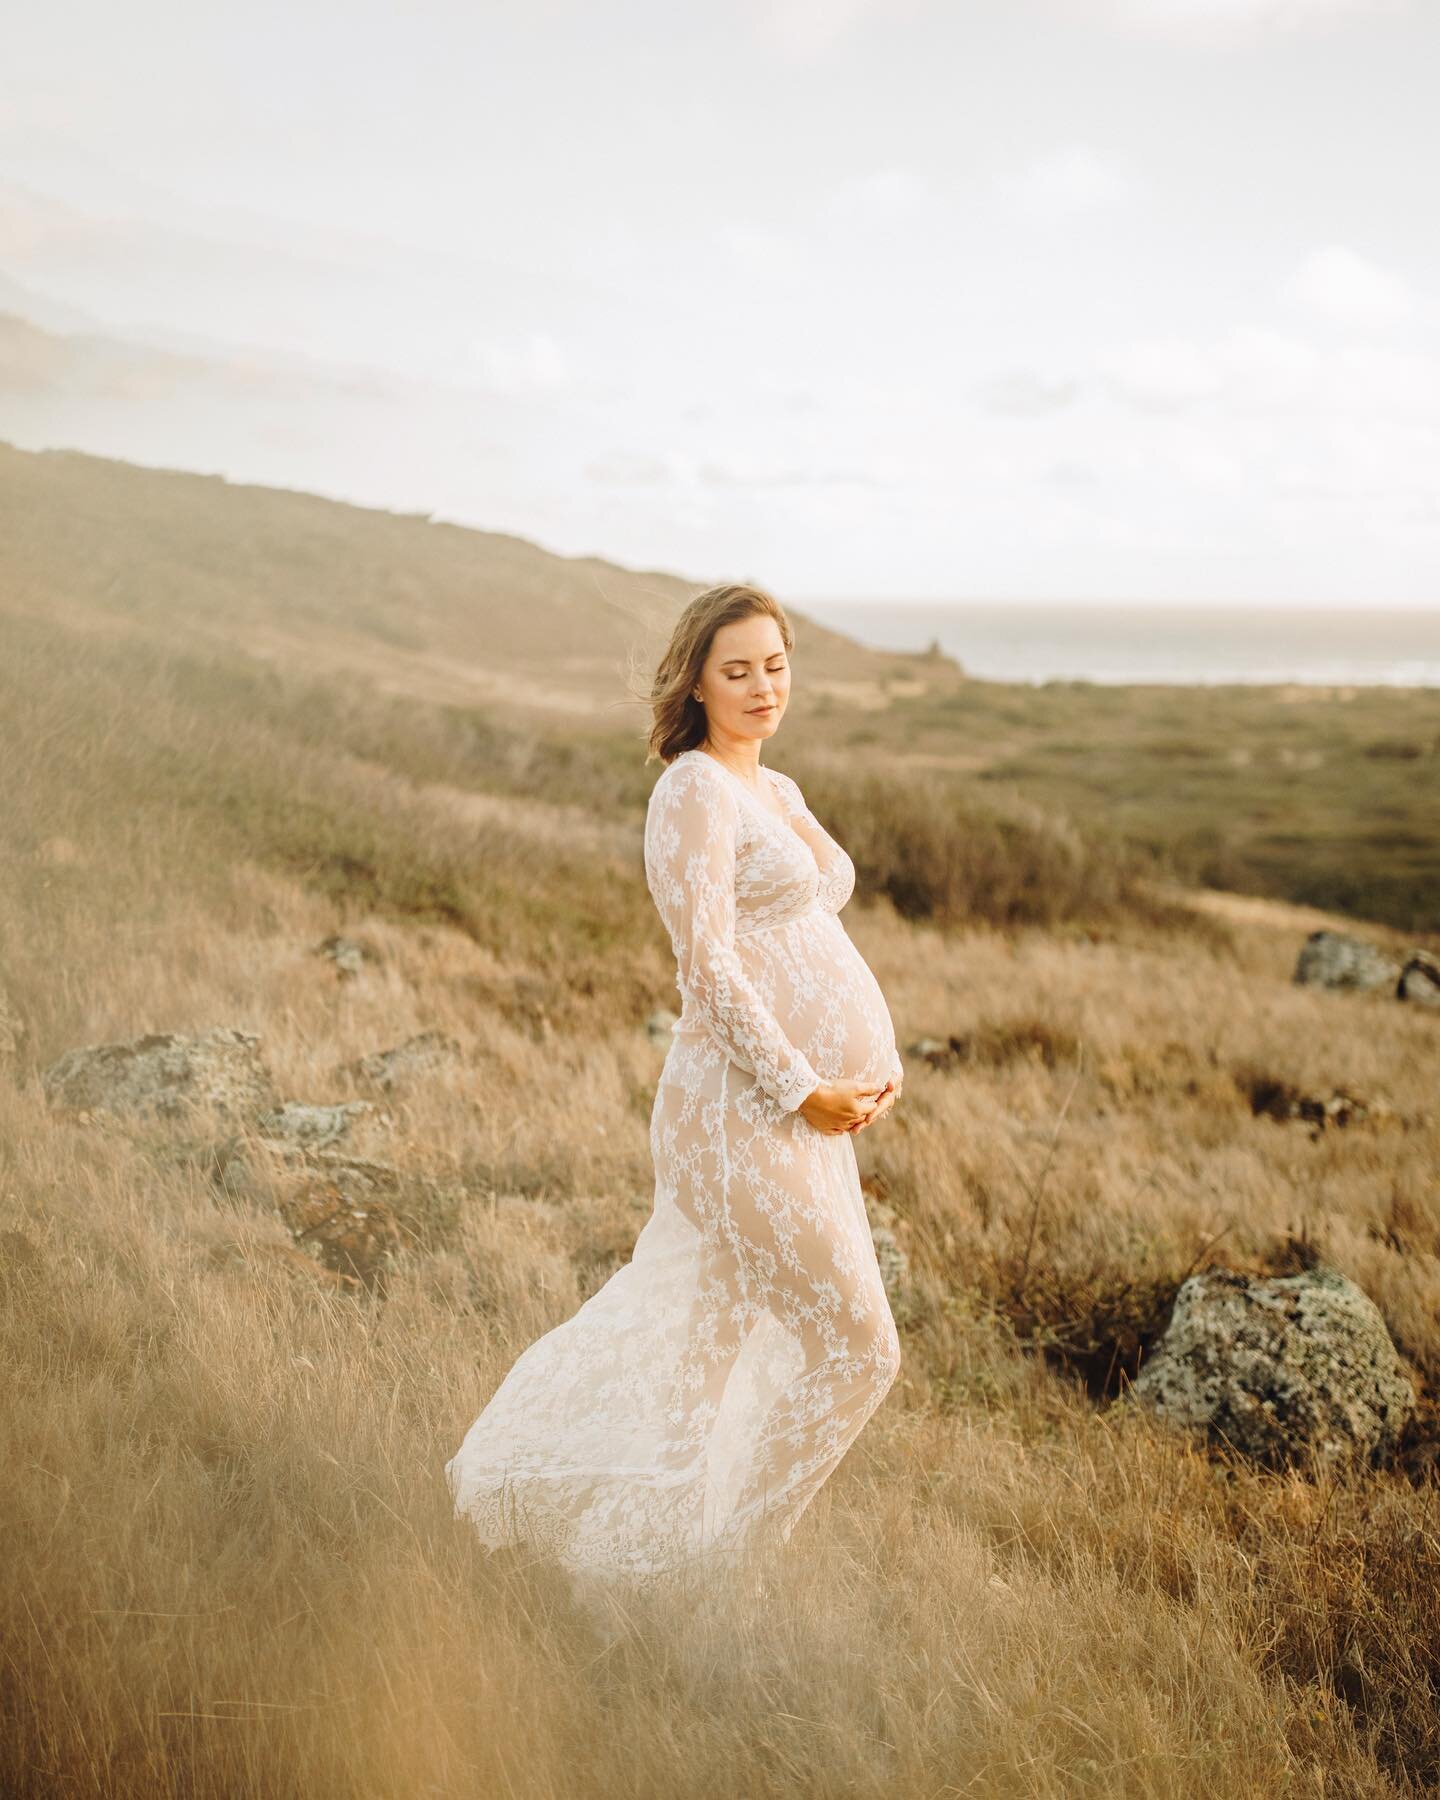 From knowing these two as the cutest couple in high school, to shooting their Wedding, and now watching them become parents just makes me 😭😩🤍 

Look at this gorgeous Mama!! Isn&rsquo;t she stunning?? ✨

Tris and Raven, you guys are going to be the